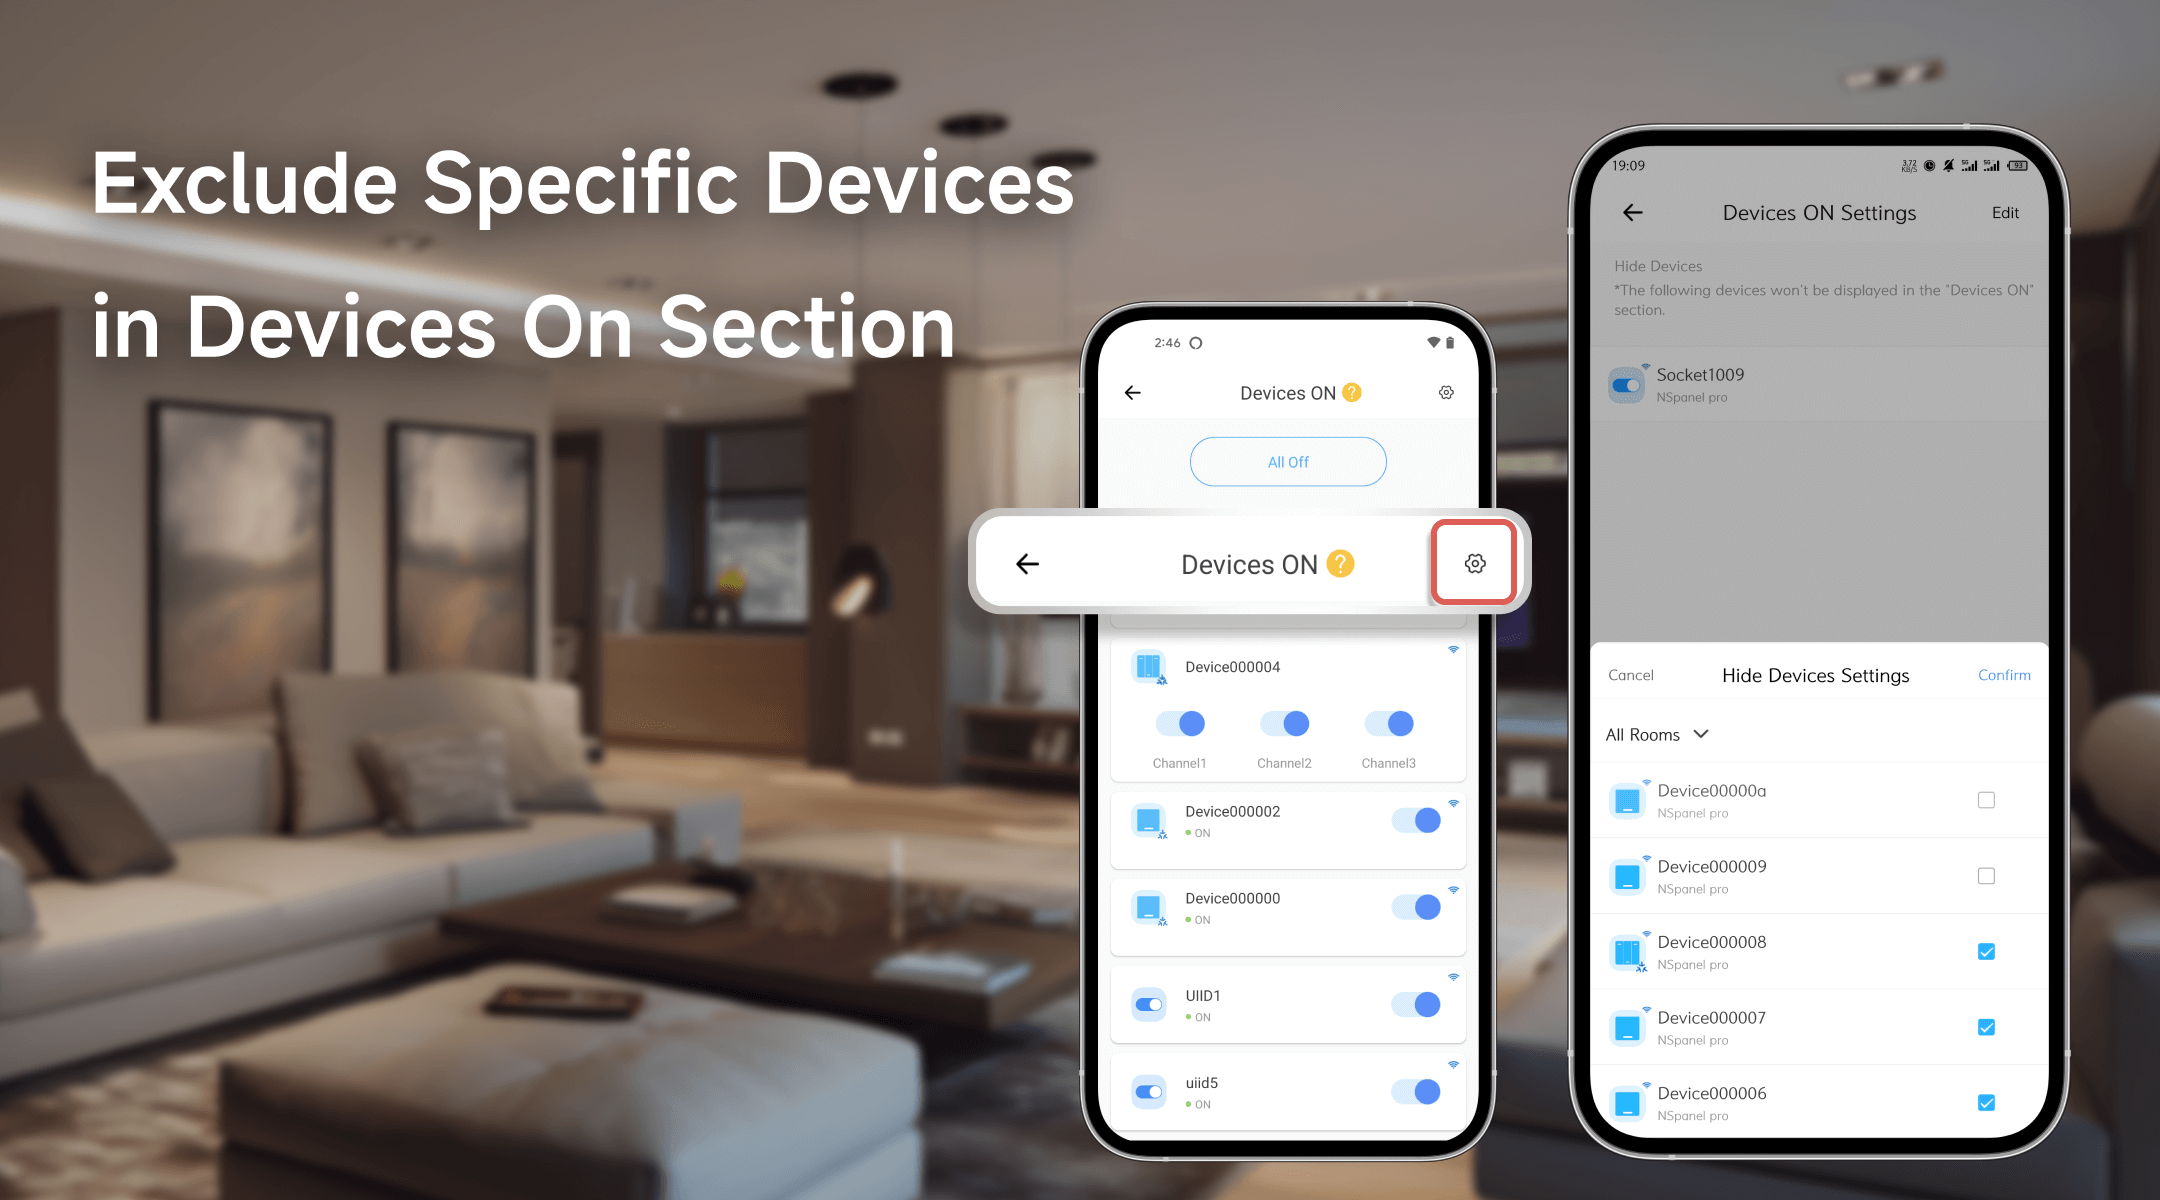 Devices On Section